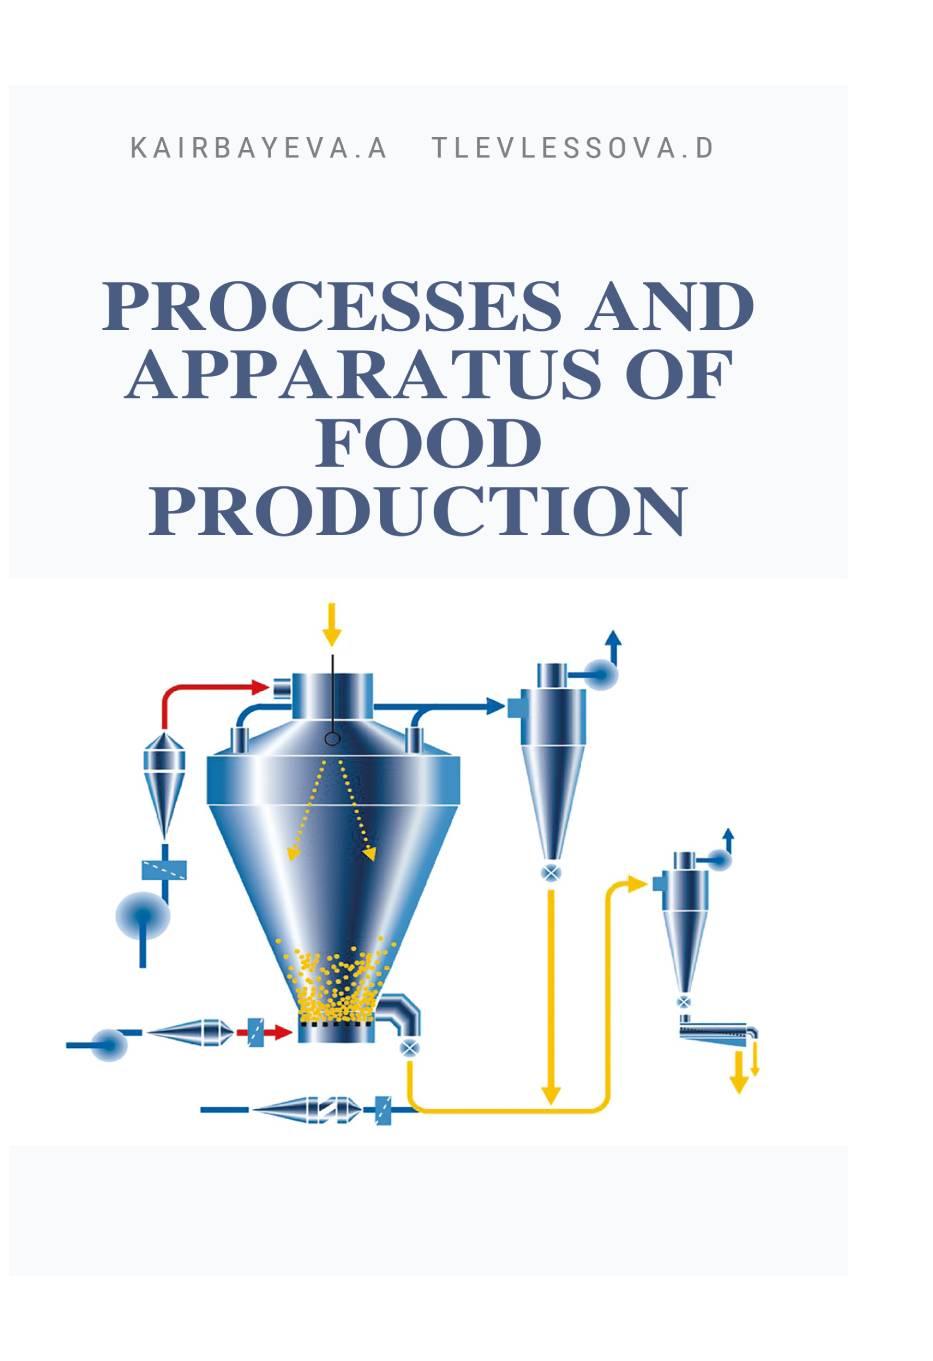 Processes and apparatus of food production: Textbook.